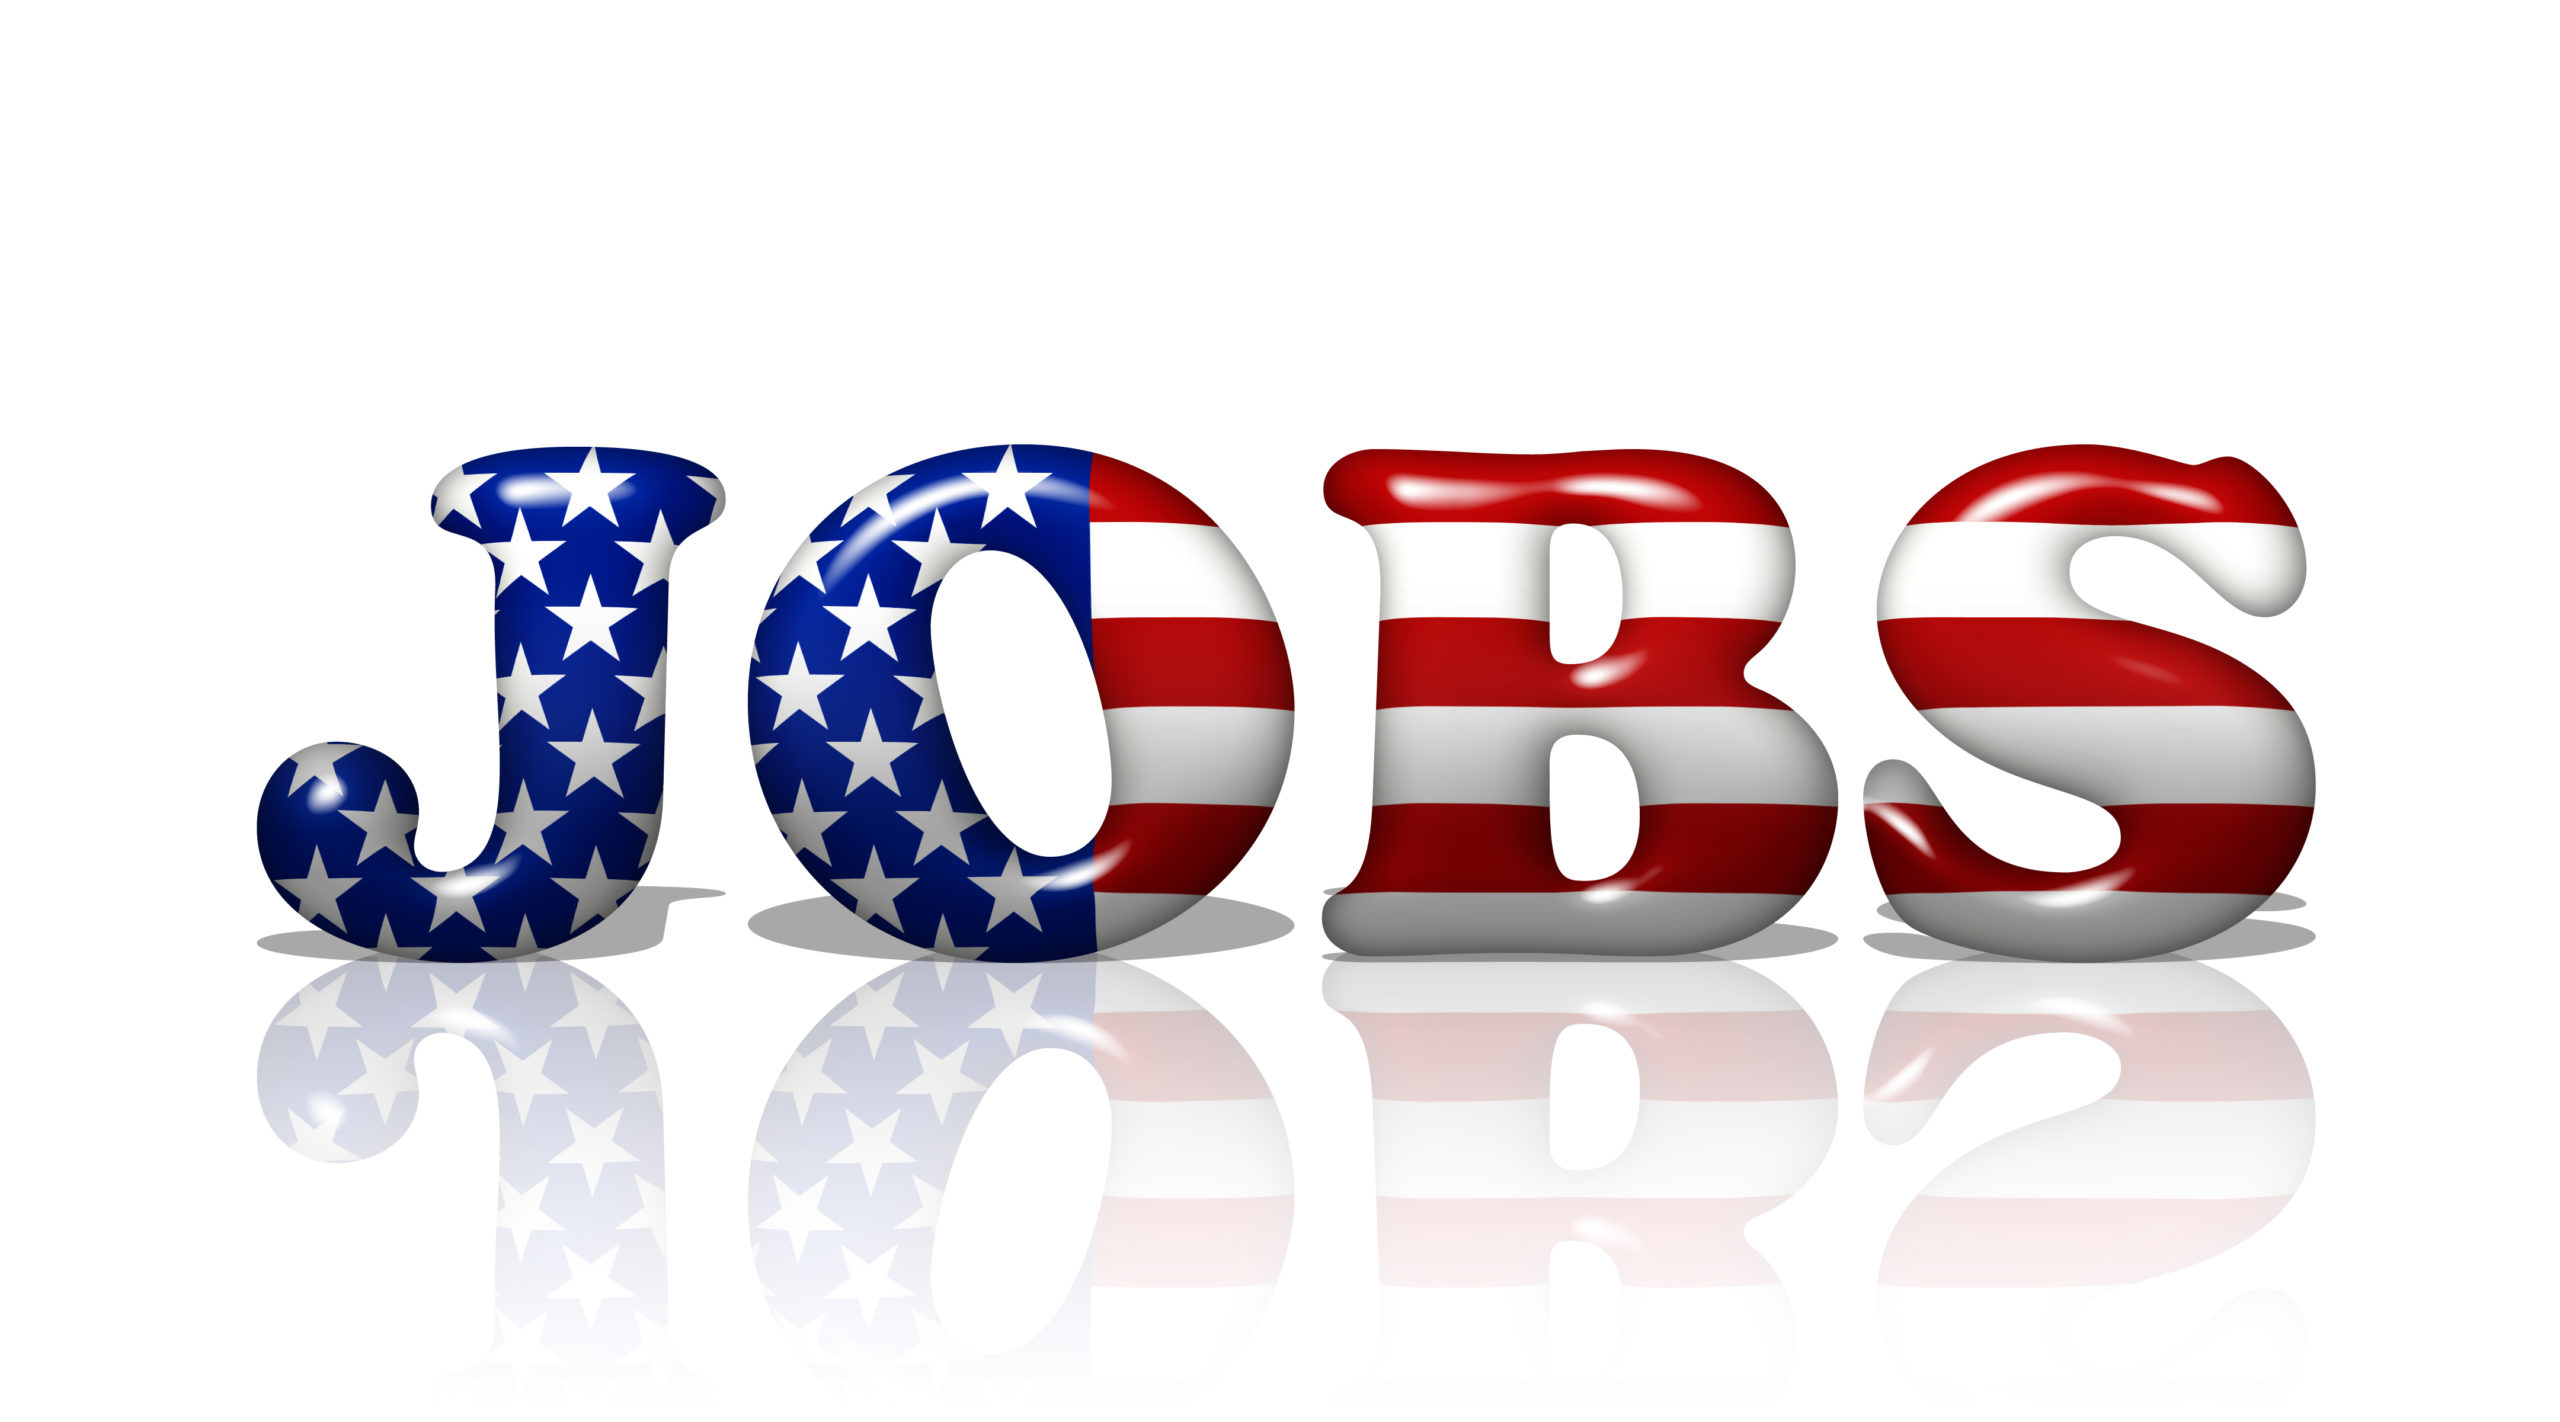 The,word,jobs,in,the,american,flag,colors,,jobs,in